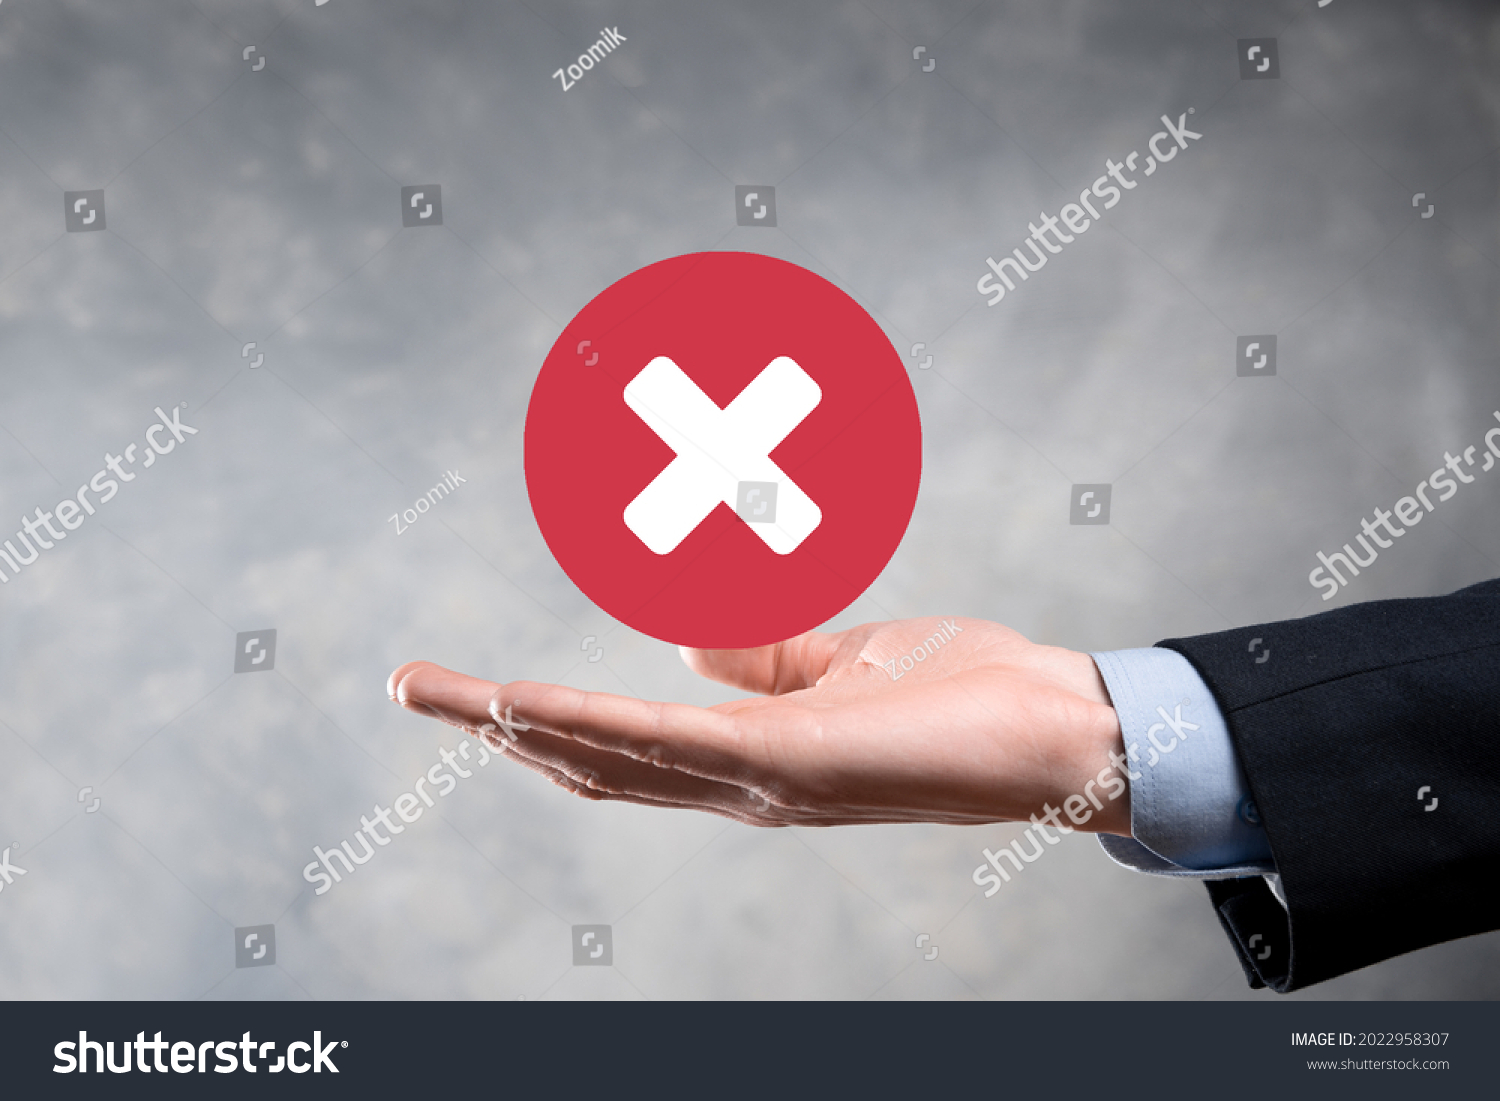 Hand holds icon,cancellation symbol,cancel icon.Cross mark flat red icon.round X mark.cancel button.Wrong.cross mark rejection.Declined.On dark background.Banner.Copy space.Place for text #2022958307